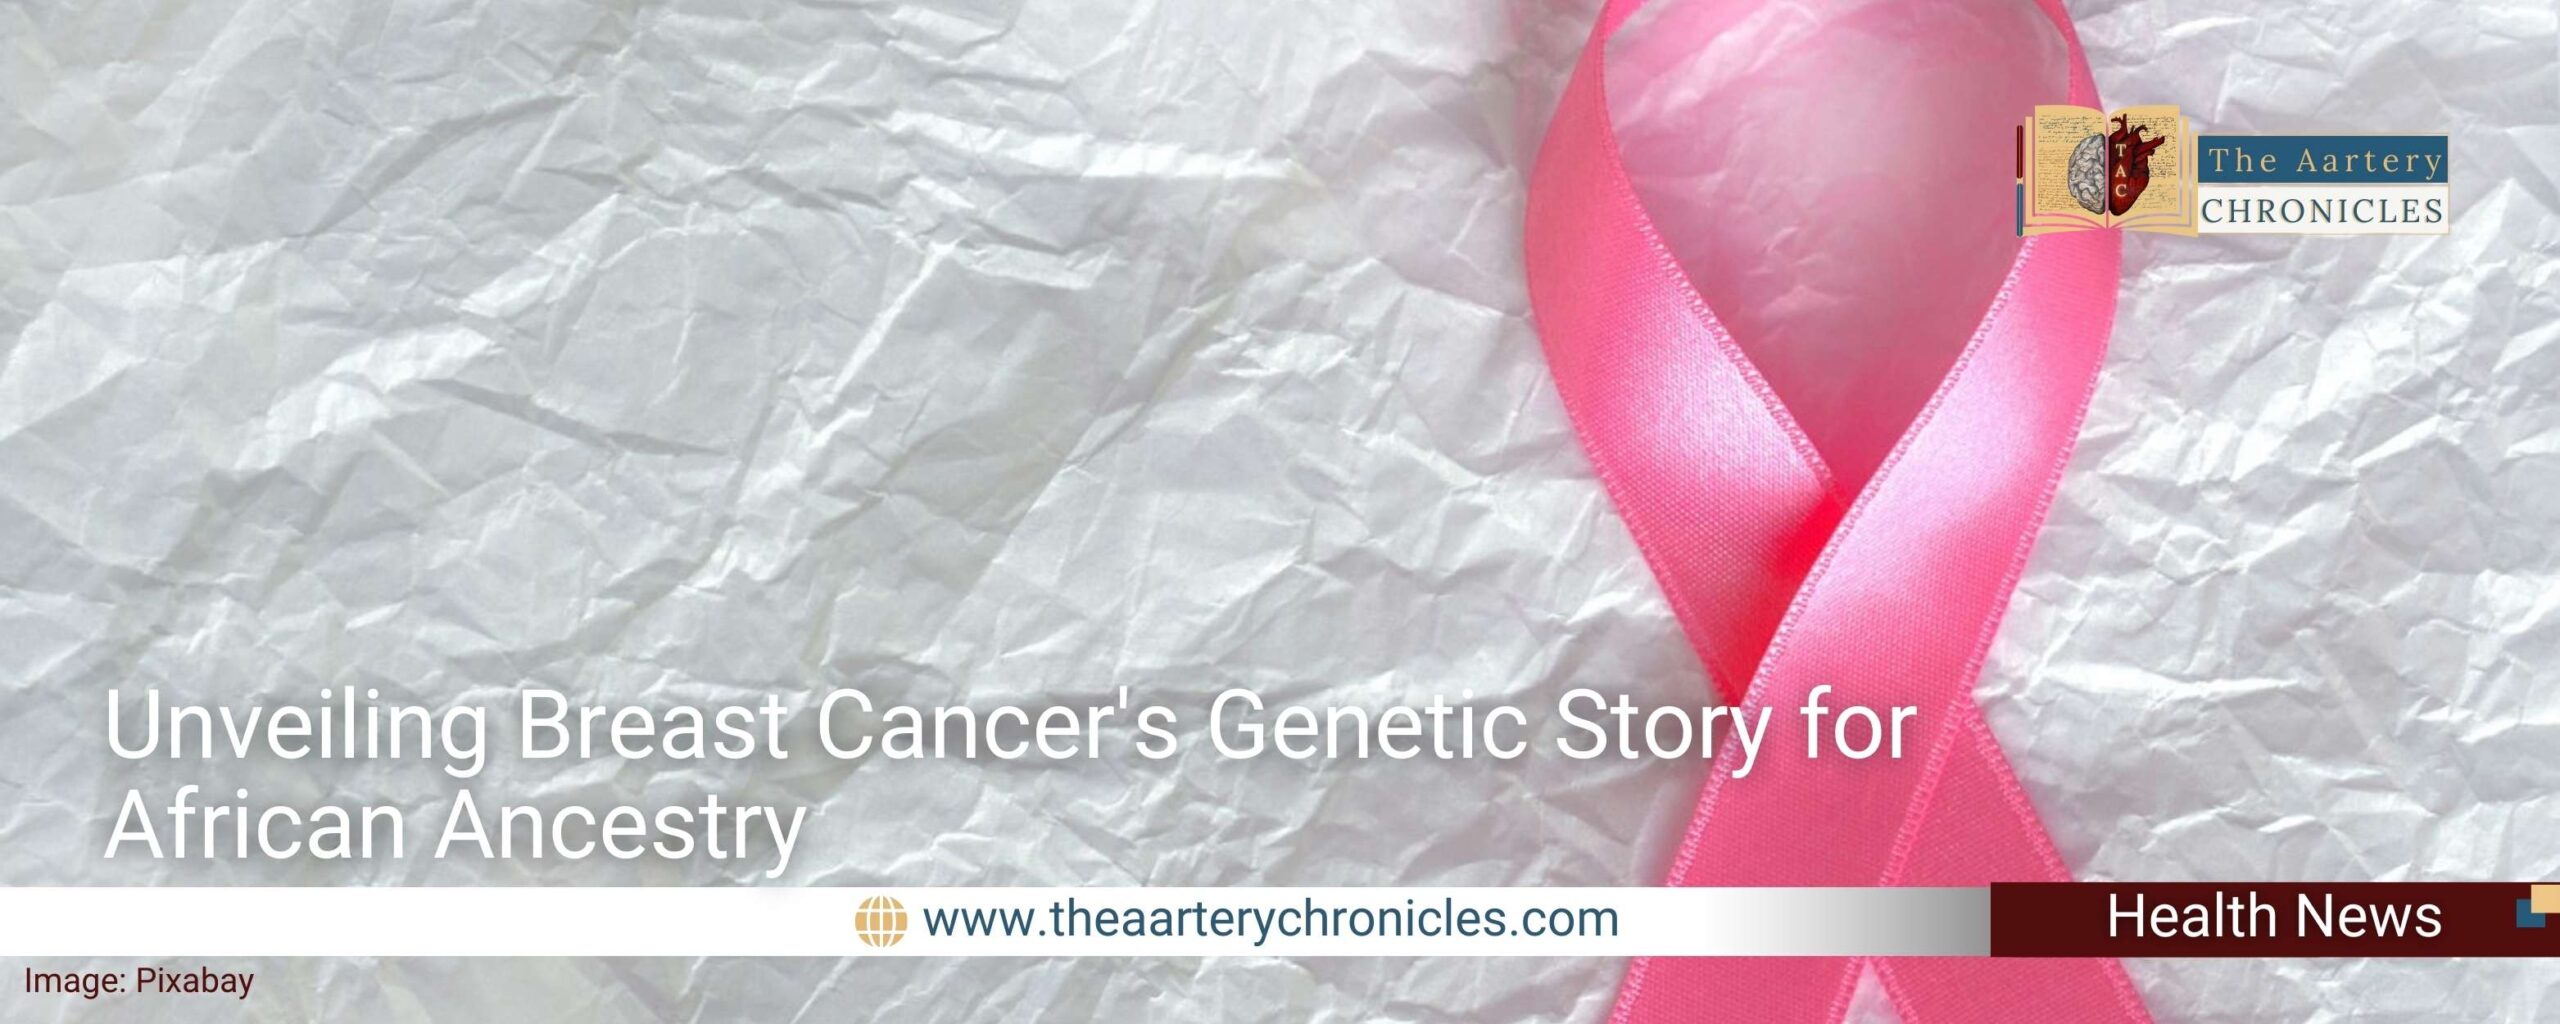 Unveiling-Breast-Cancer's-Genetic-Story-for-African-Ancestry-The-Aartery-Chronicles-tac